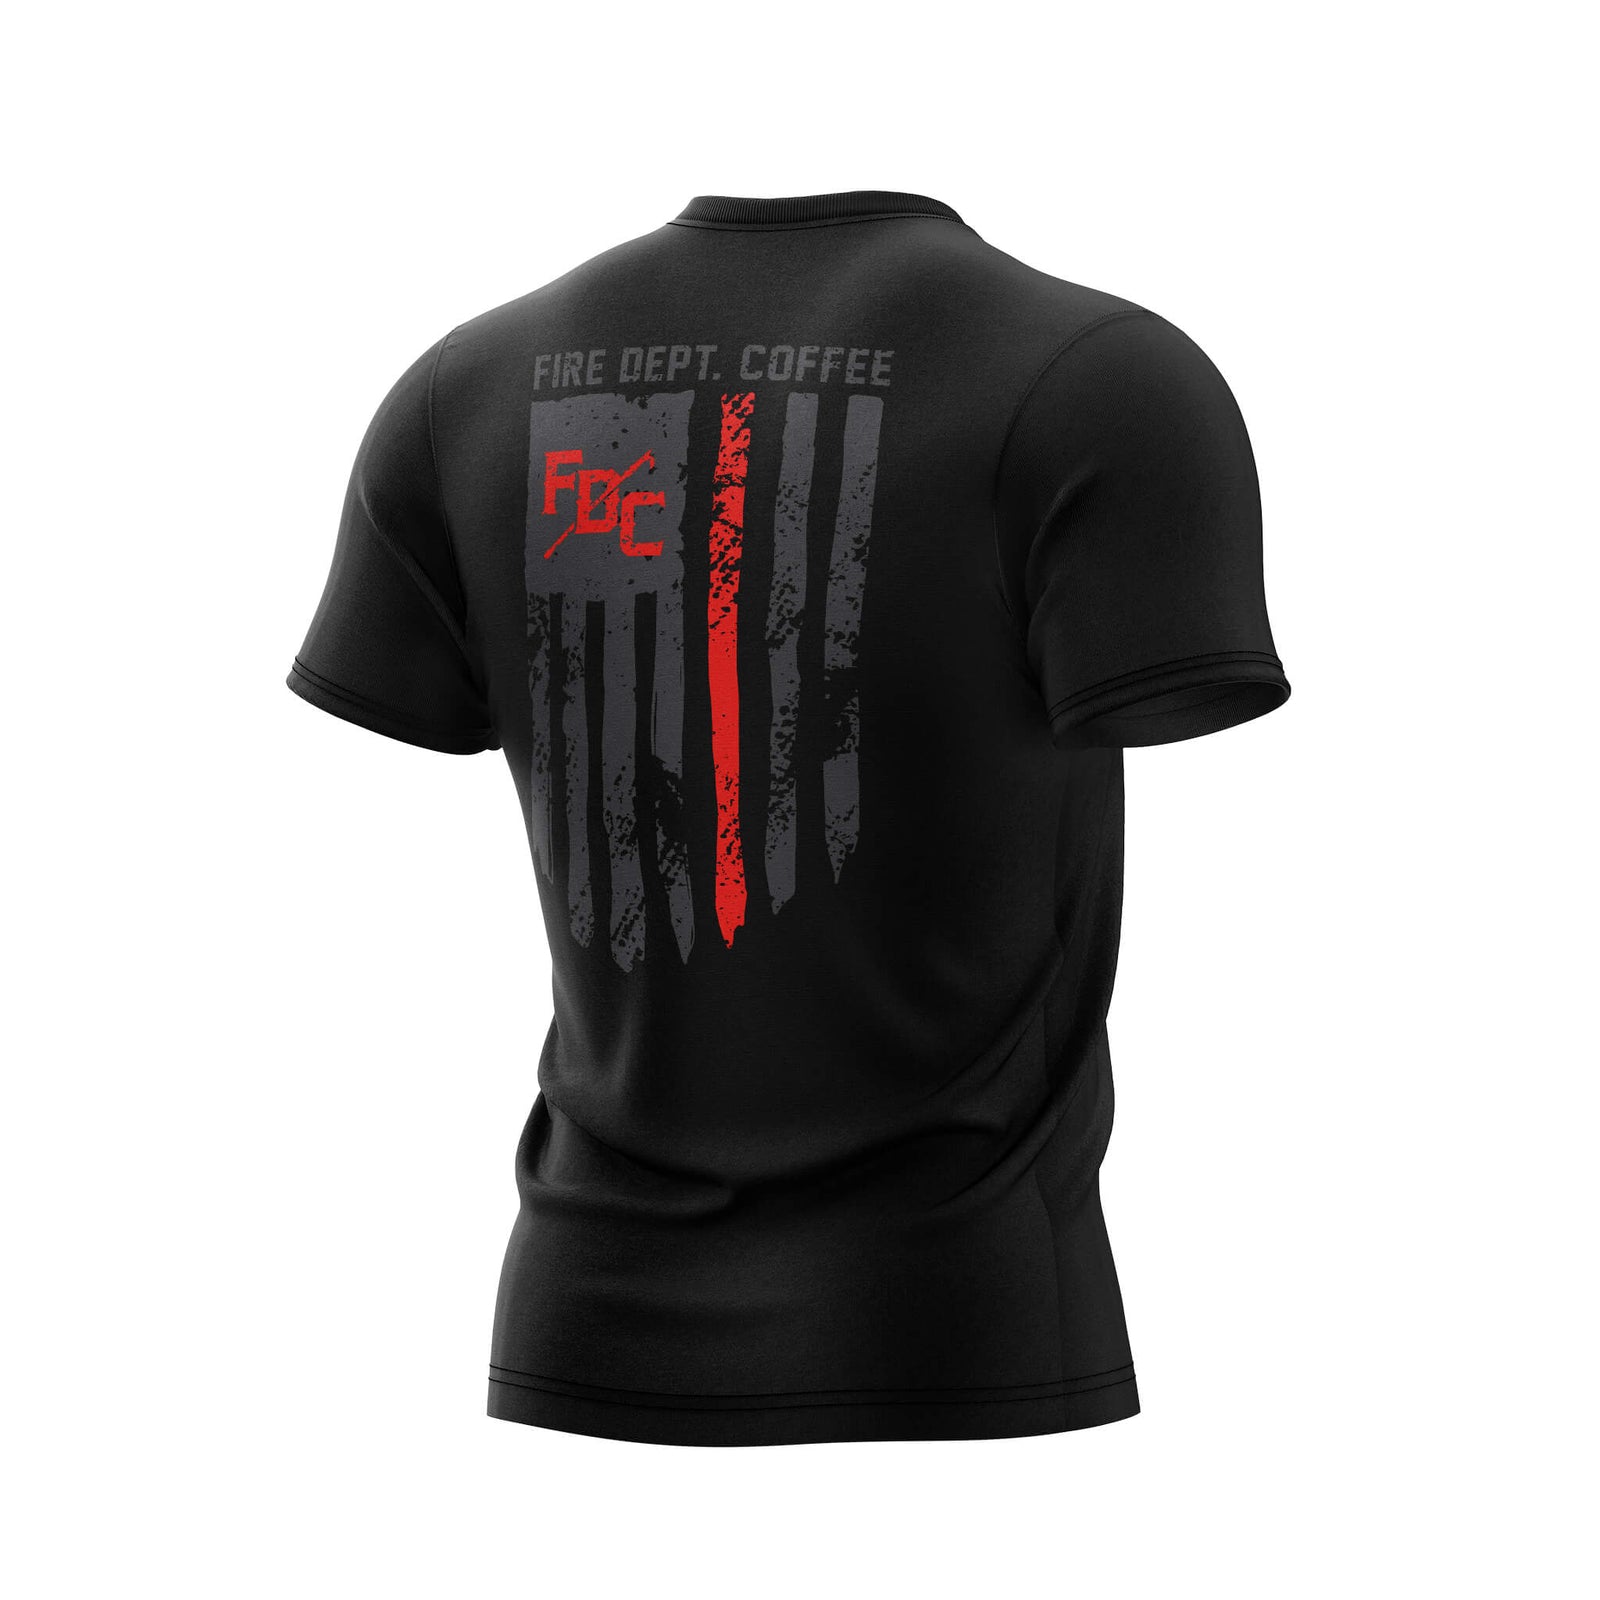 The back of a black t shirt with the thin red line going down the back. FDC pike pole logo is in the top right corner of the flag in red and text "fire dept. coffee" is above the flag.